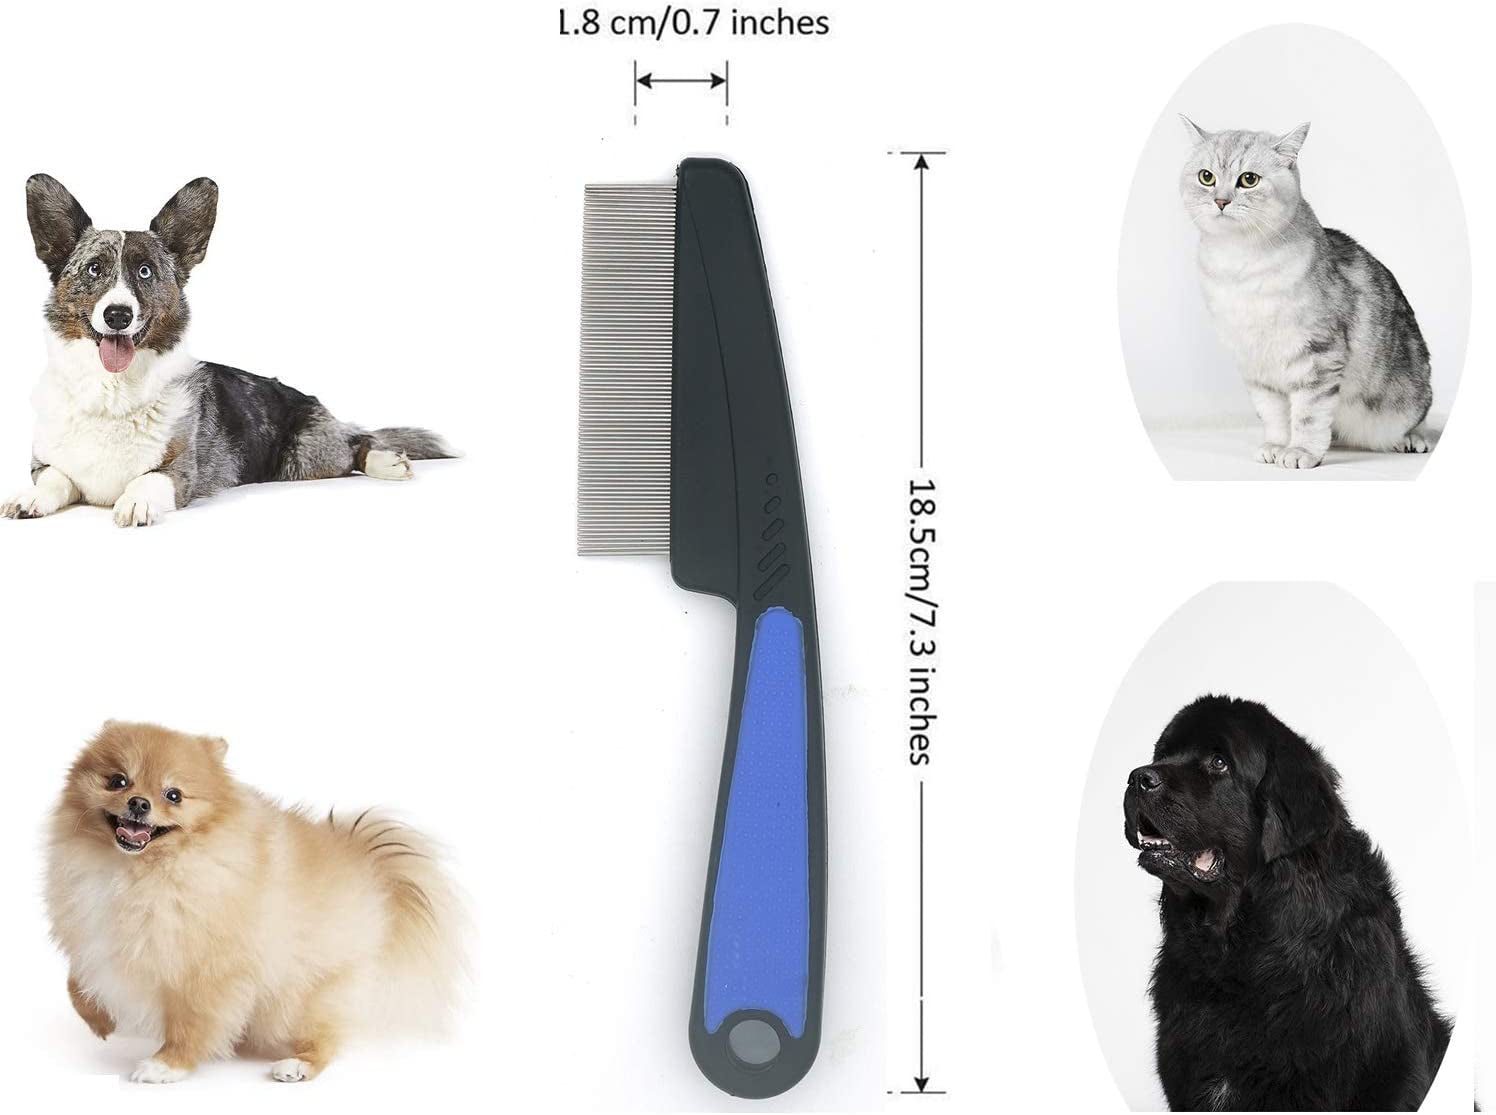 Flea Comb for Dogs, Lice Combs,Tick Comb, Cat Flea Combs with Durable Teeth for Removing Tear Stains, Fleas, Dandruff, Lice by